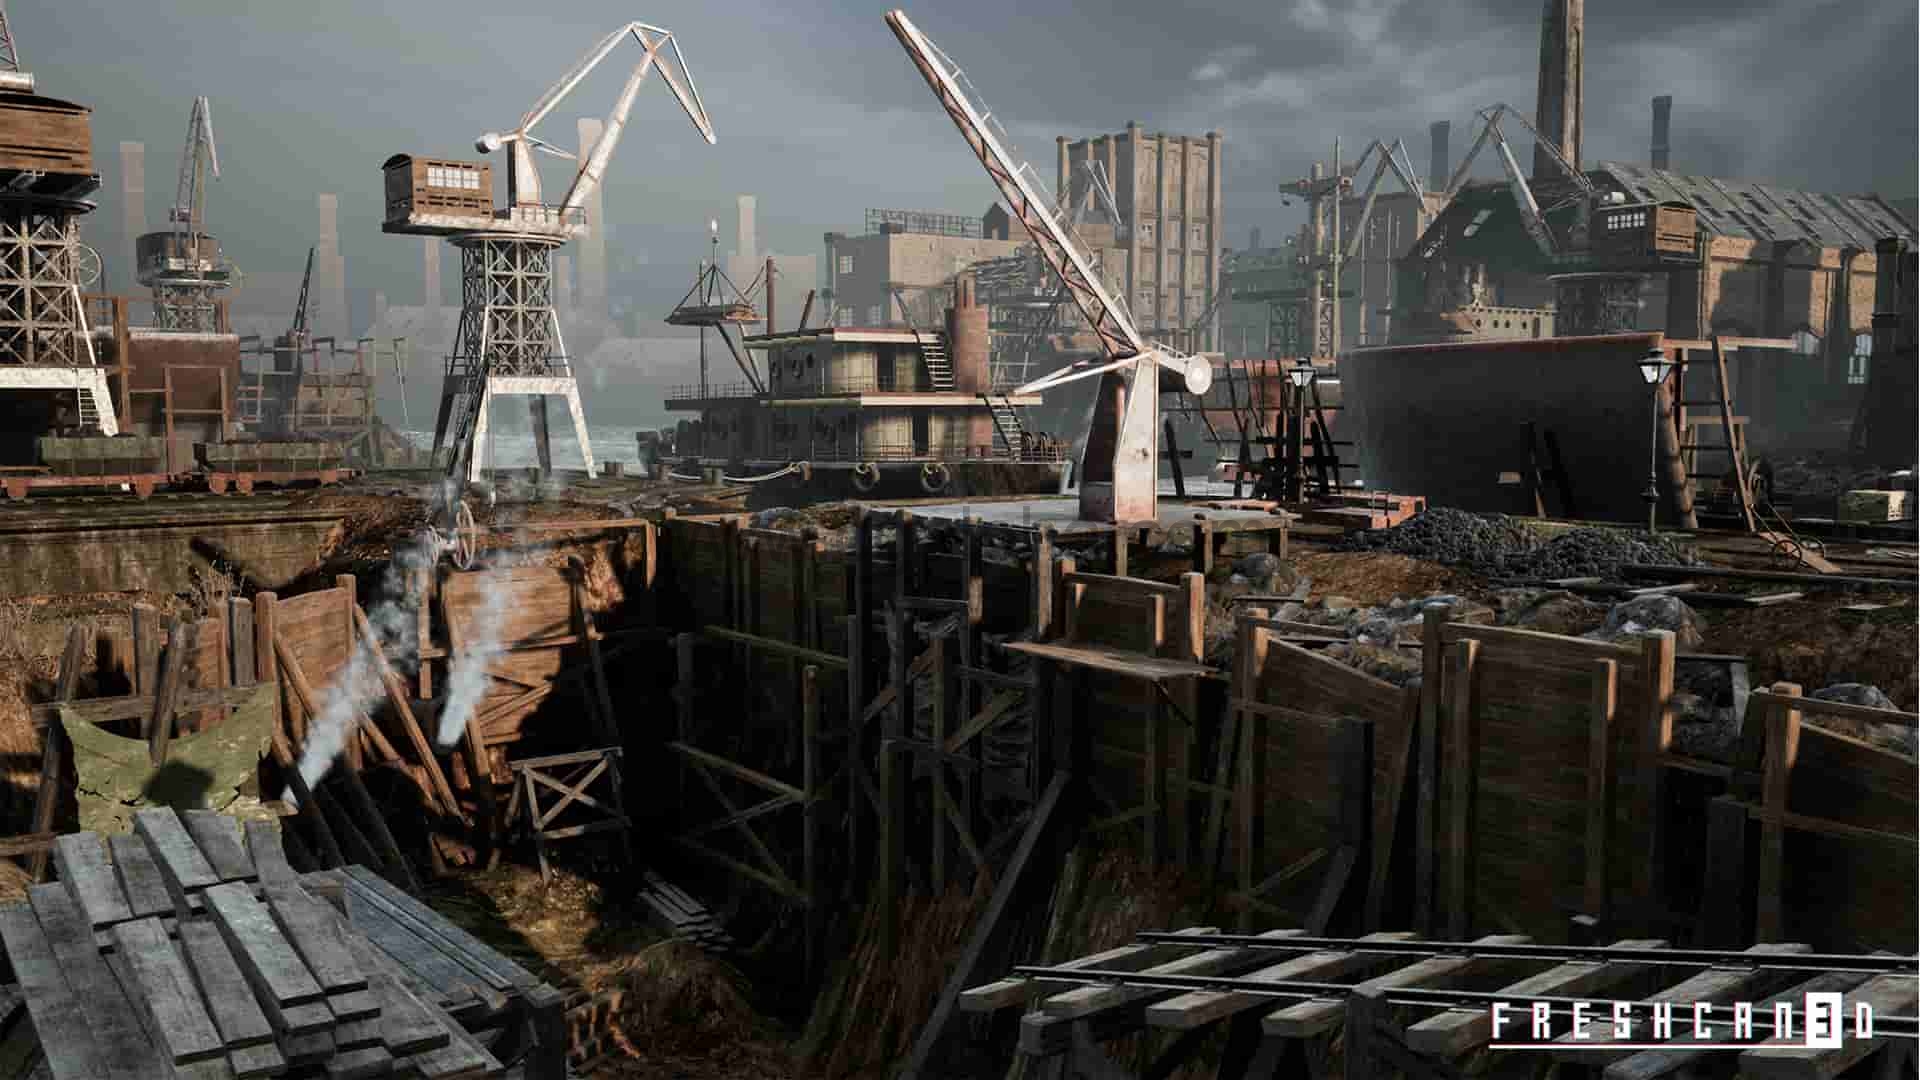 【UE4】破旧工业城市造船厂 Old Industrial City and Shipyard with Factory Interiors